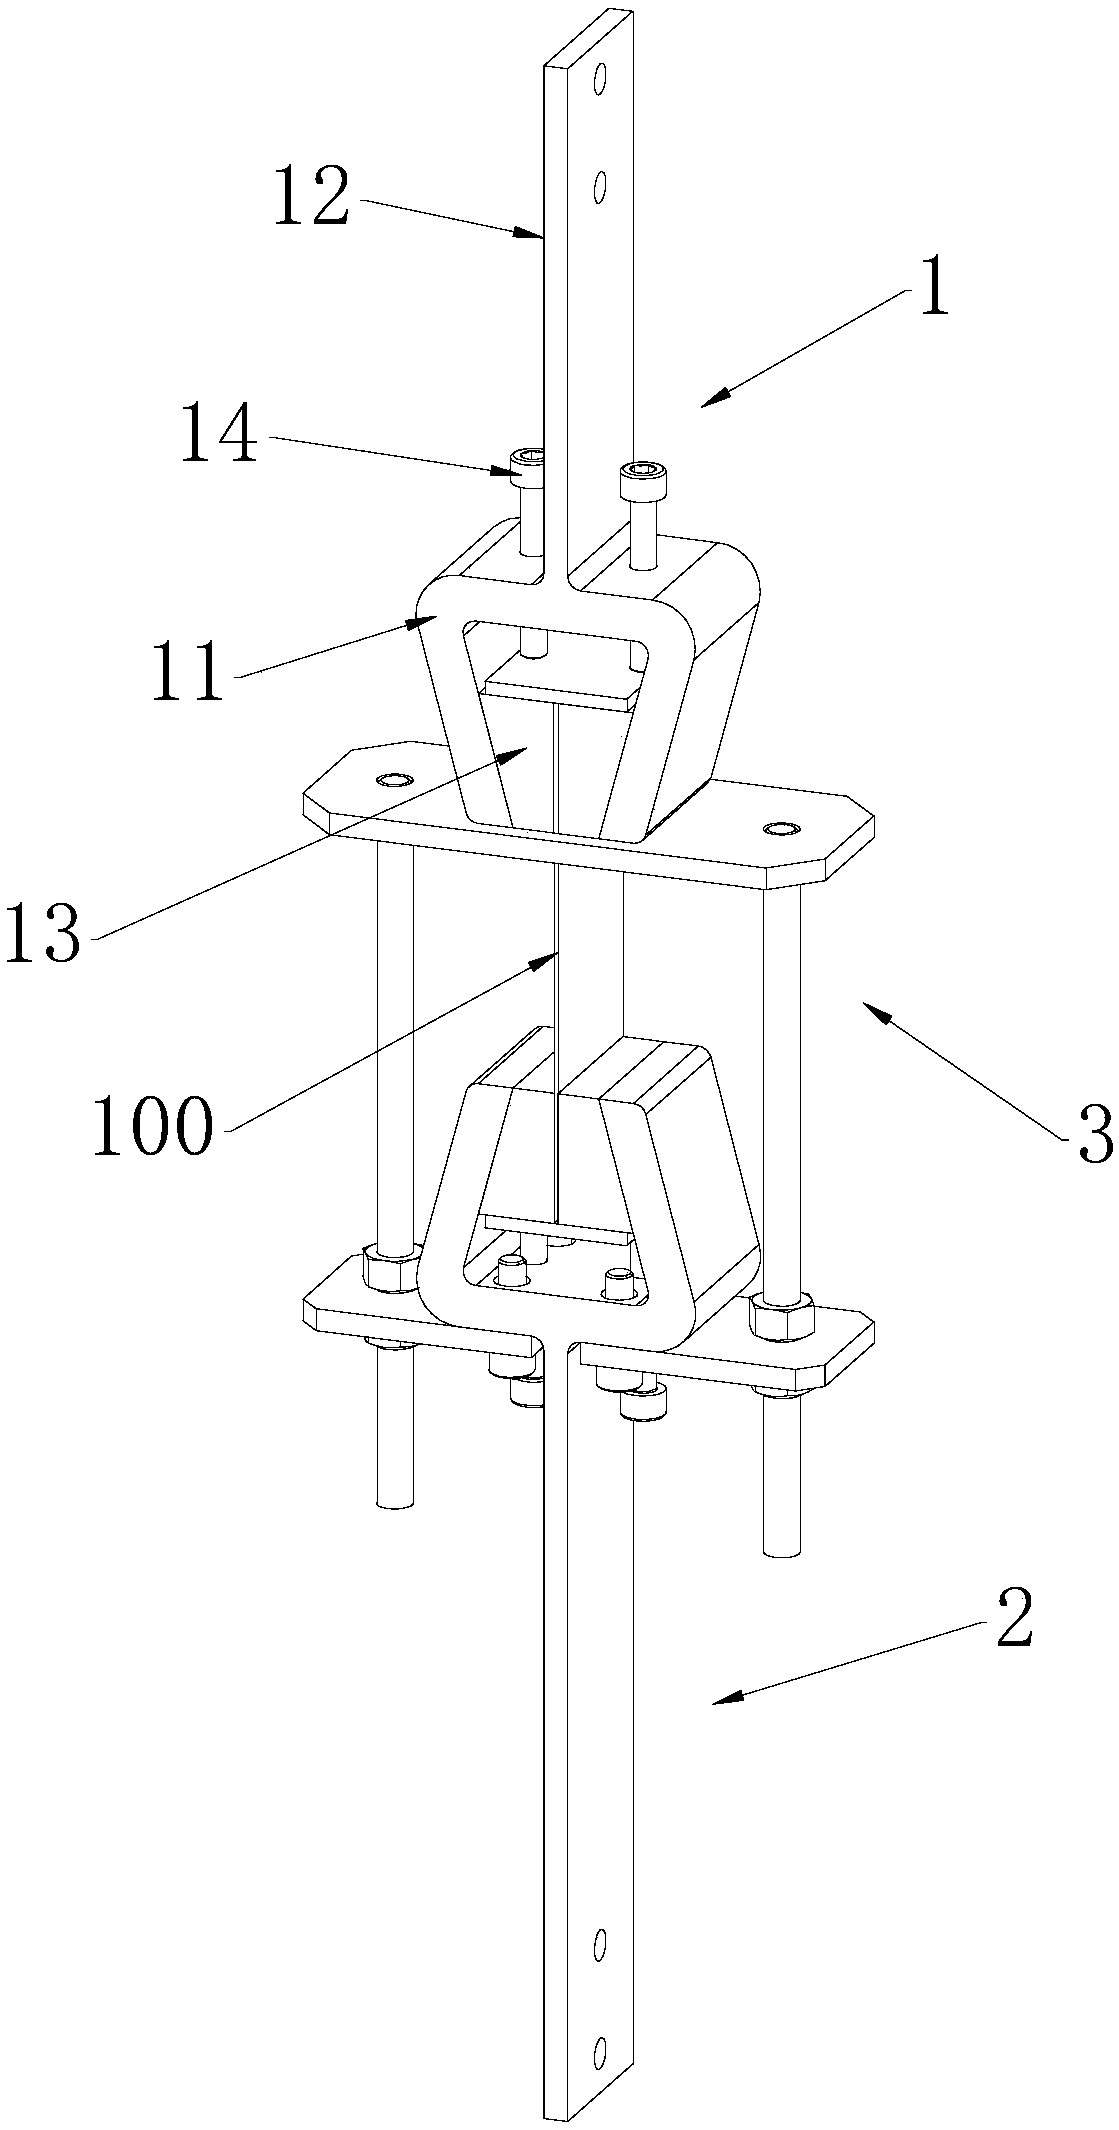 Clamping device for high-speed stretching of automotive plastics